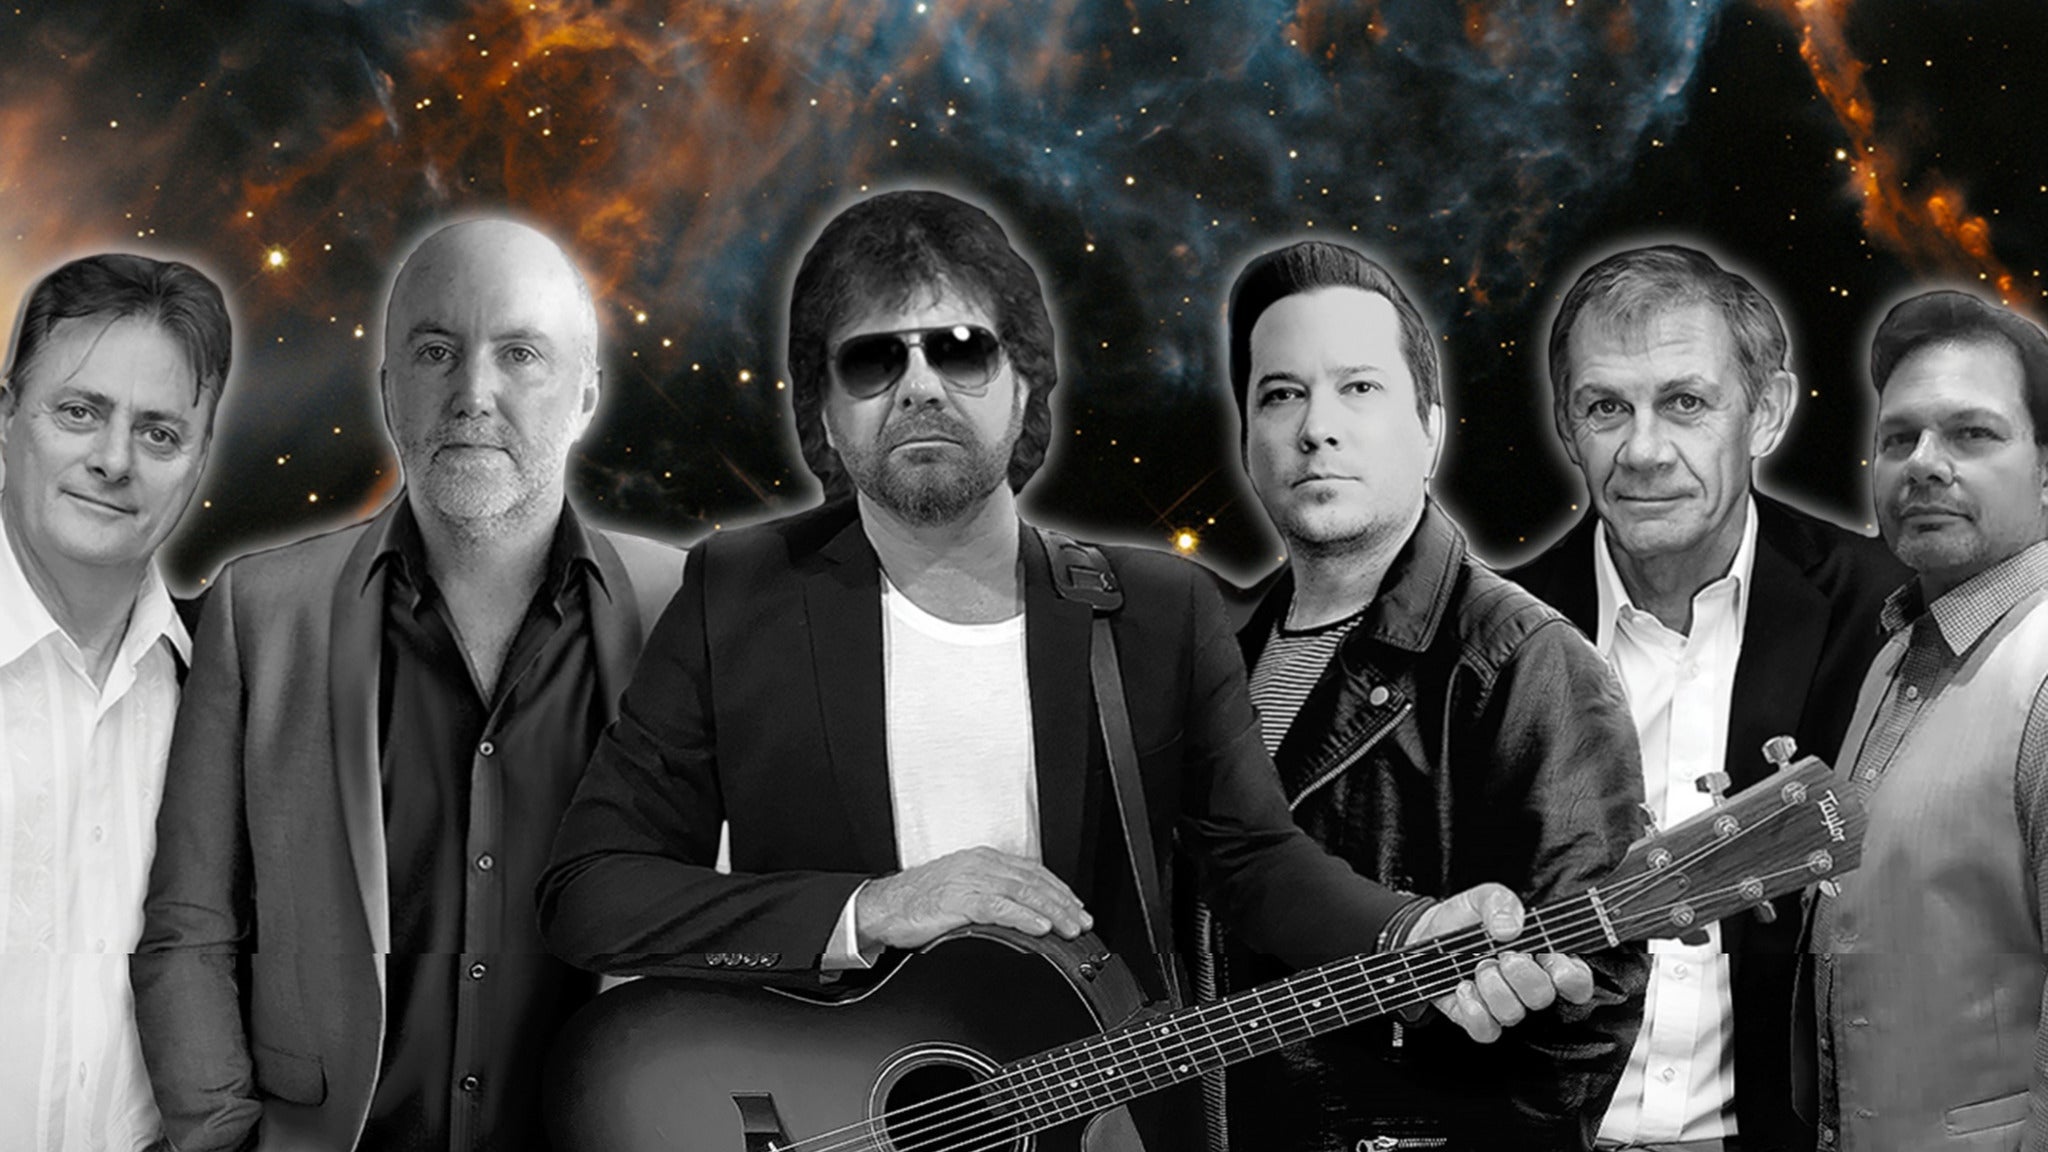 Image used with permission from Ticketmaster | Rockaria The ELO Experience tickets